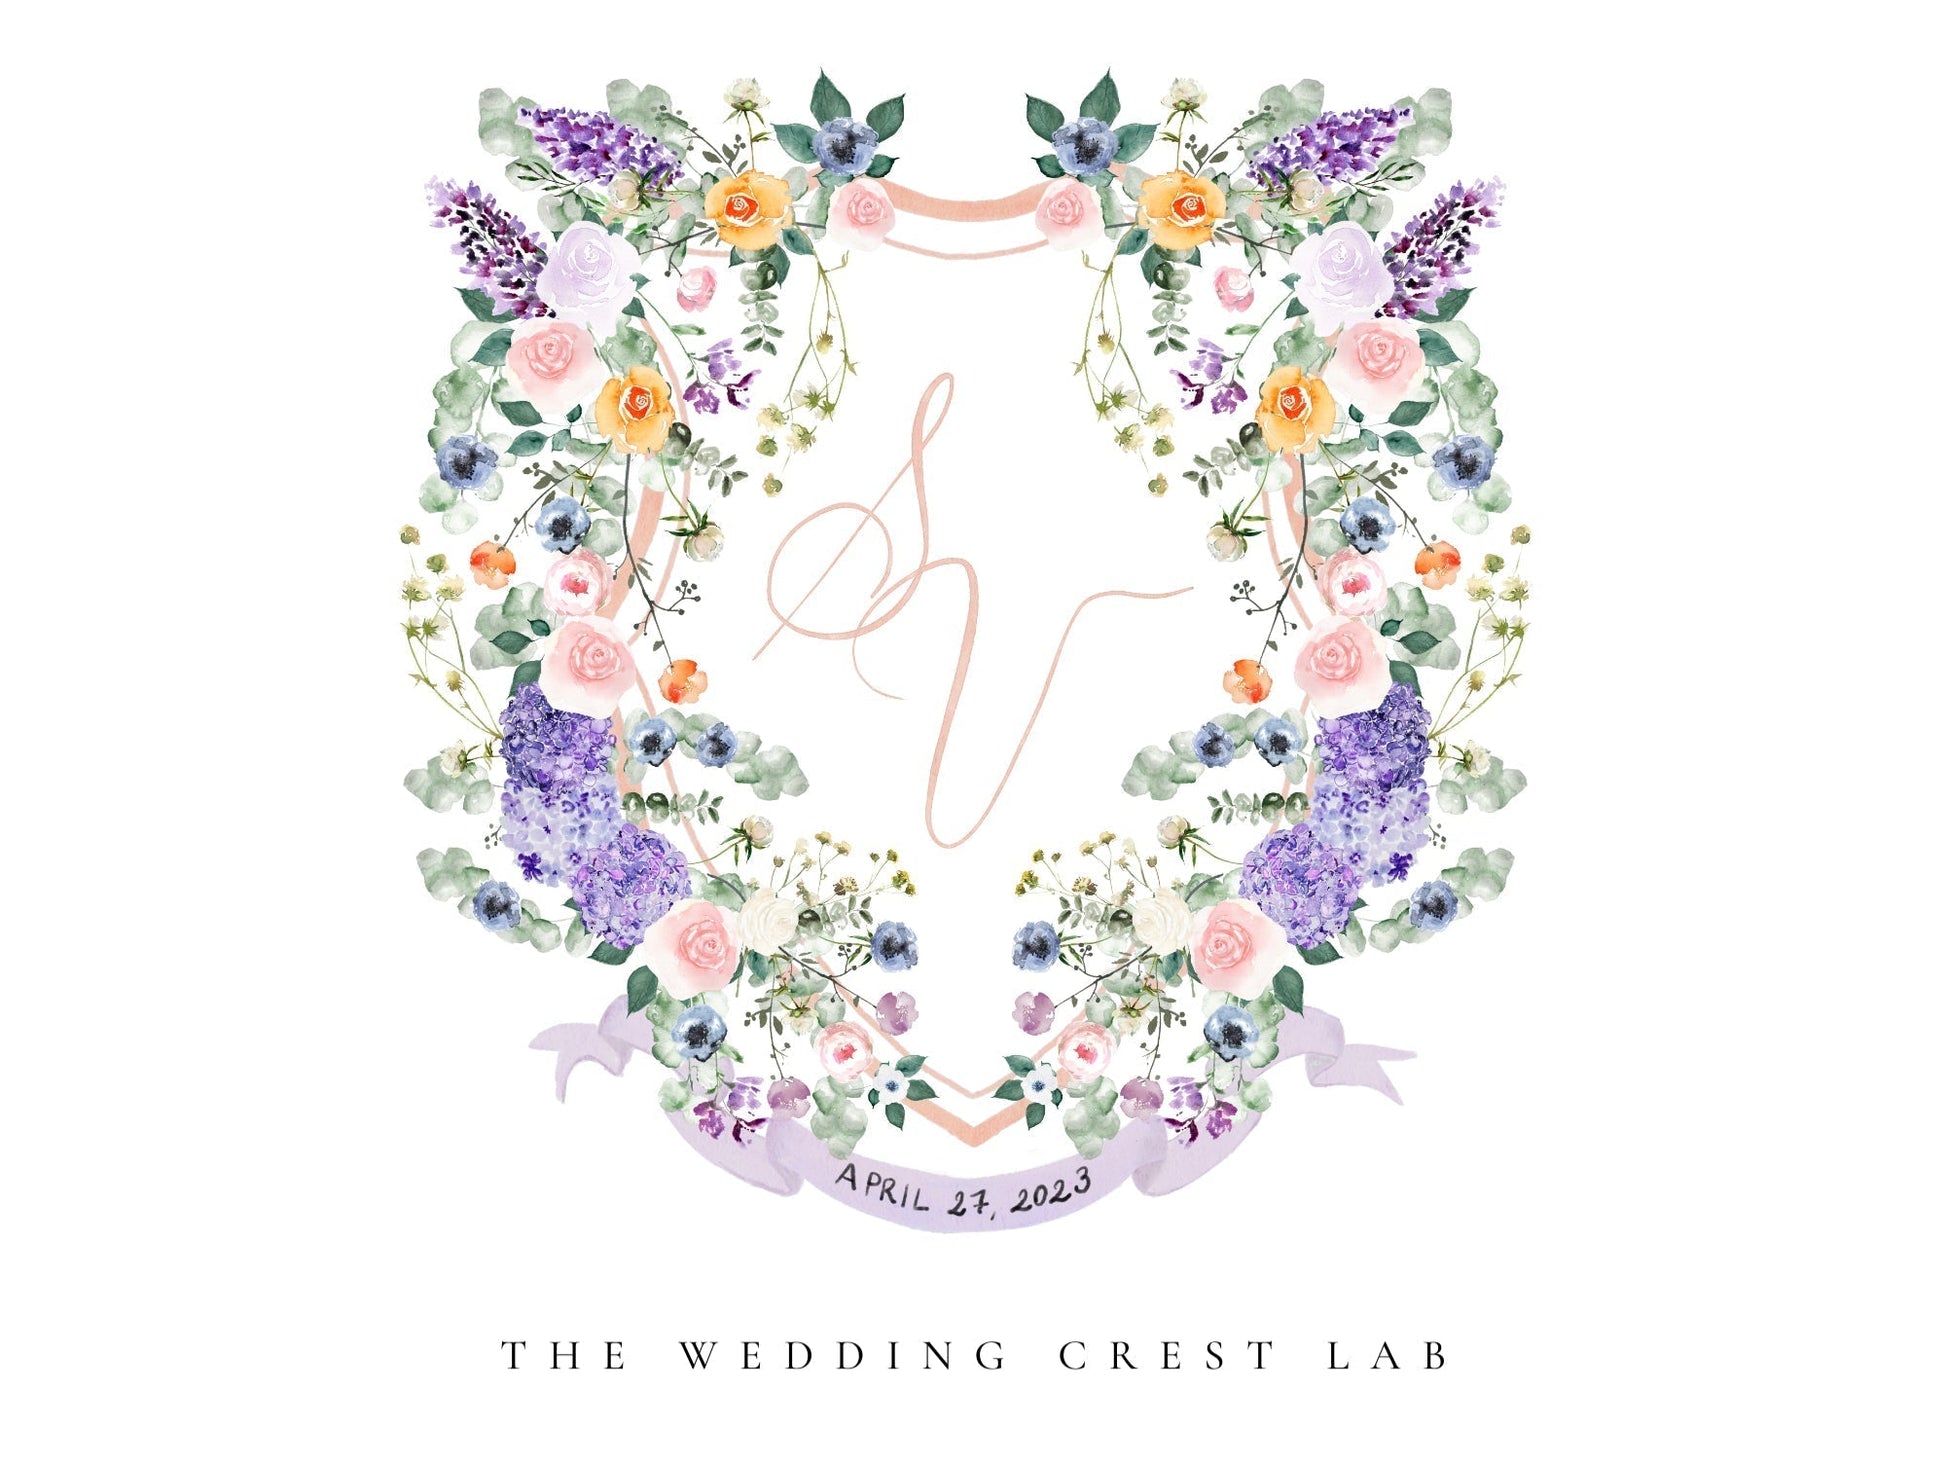 Custom wedding crest with watercolor flowers and pet or venue portrait - The Wedding Crest Lab